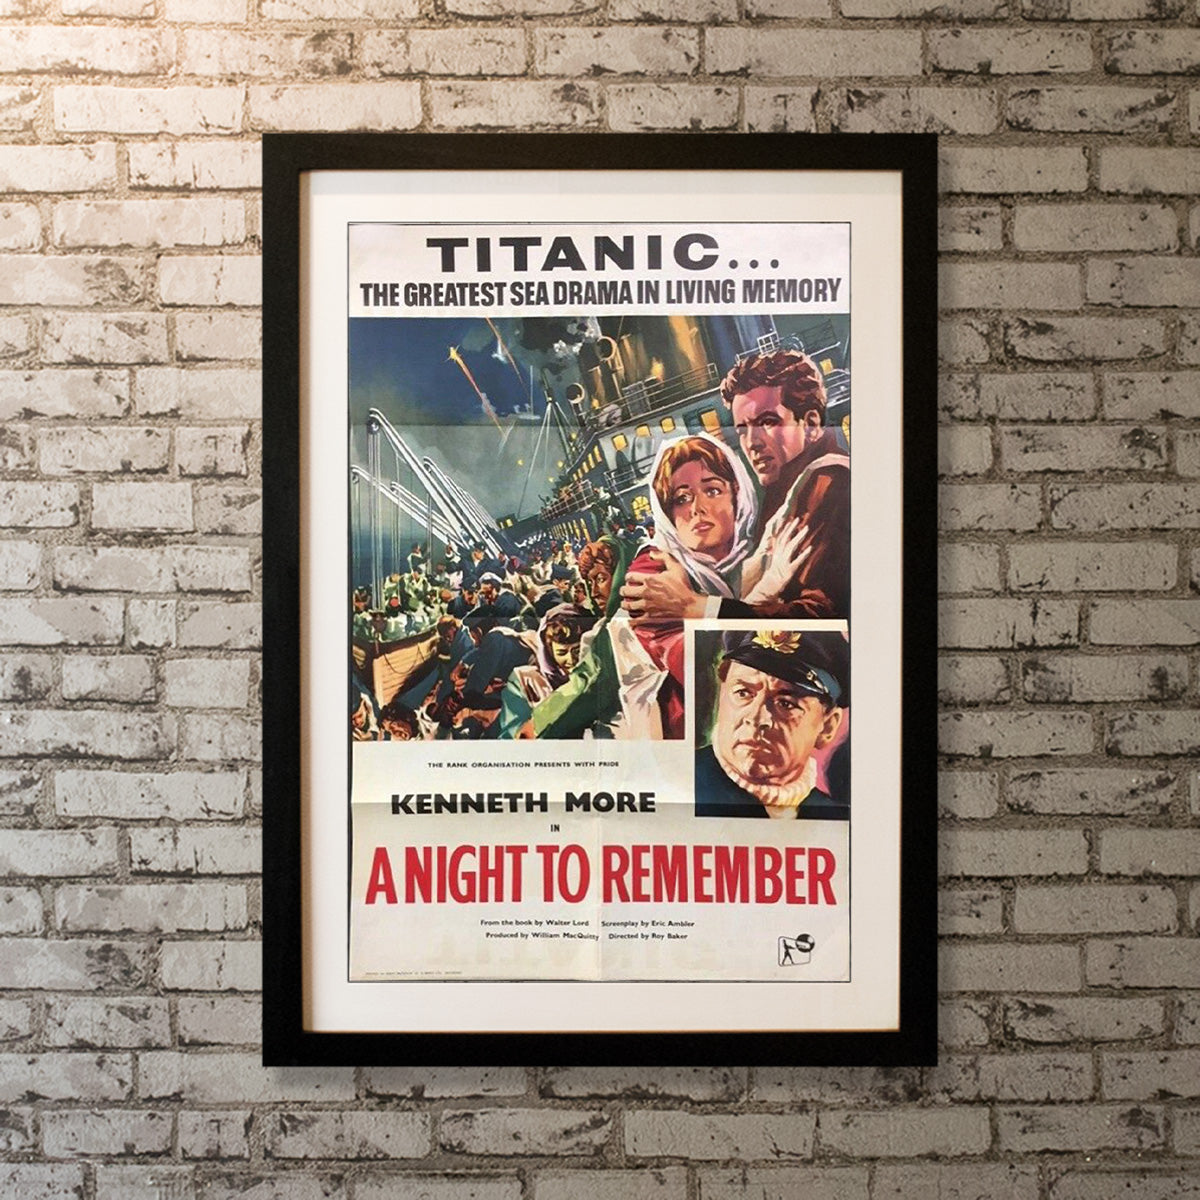 Original Movie Poster of A Night To Remember (1958)